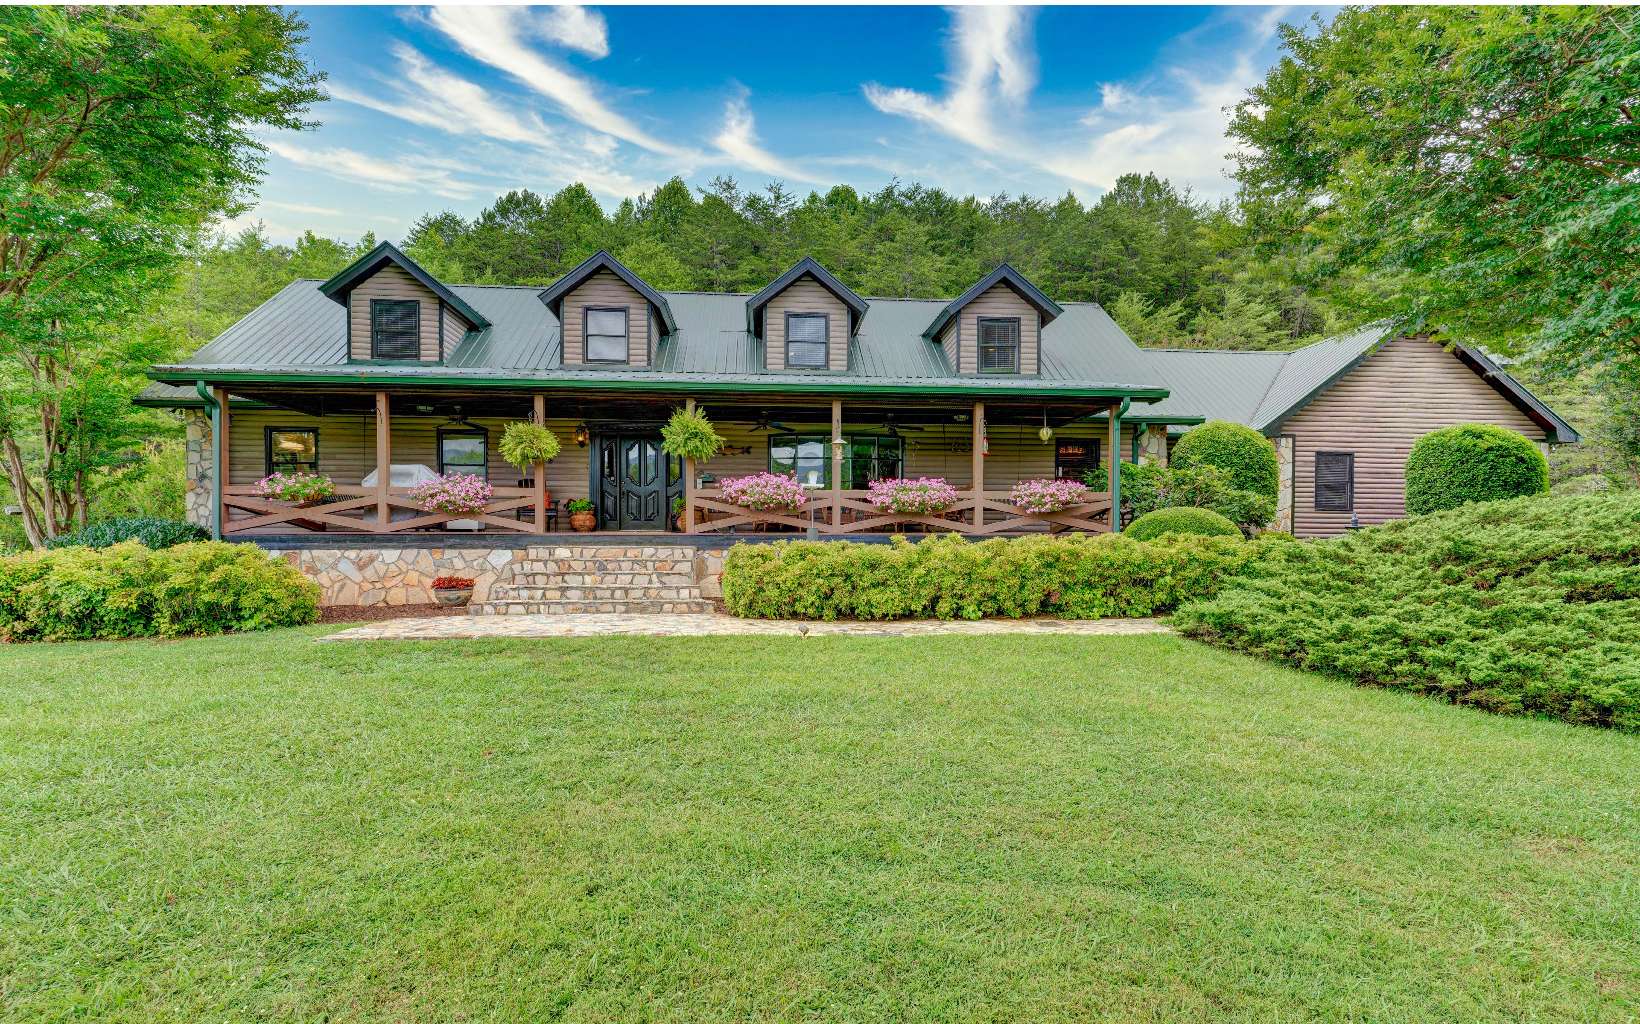 Gorgeous Mountain Retreat nestled in the North Georgia Mountains on 15 acres. Surrounded with breathtaking Mountain Views, barn, stocked pond, common area with River Access. Rocking chair front porch, 4 BR, 4 Full BA , 2 half Baths. Spacious floor plan, Kitchen features large Island with leathered granite counter top, walk in pantry, laundry room on main level. Family room with stone fireplace, Master on main level with pink marble fireplace, walk in closet. Garage with attached breezeway to main house, Guest suite, full finished basement with workshop. Must see this one. So convenient to Blue Ridge GA and Ellijay, GA.